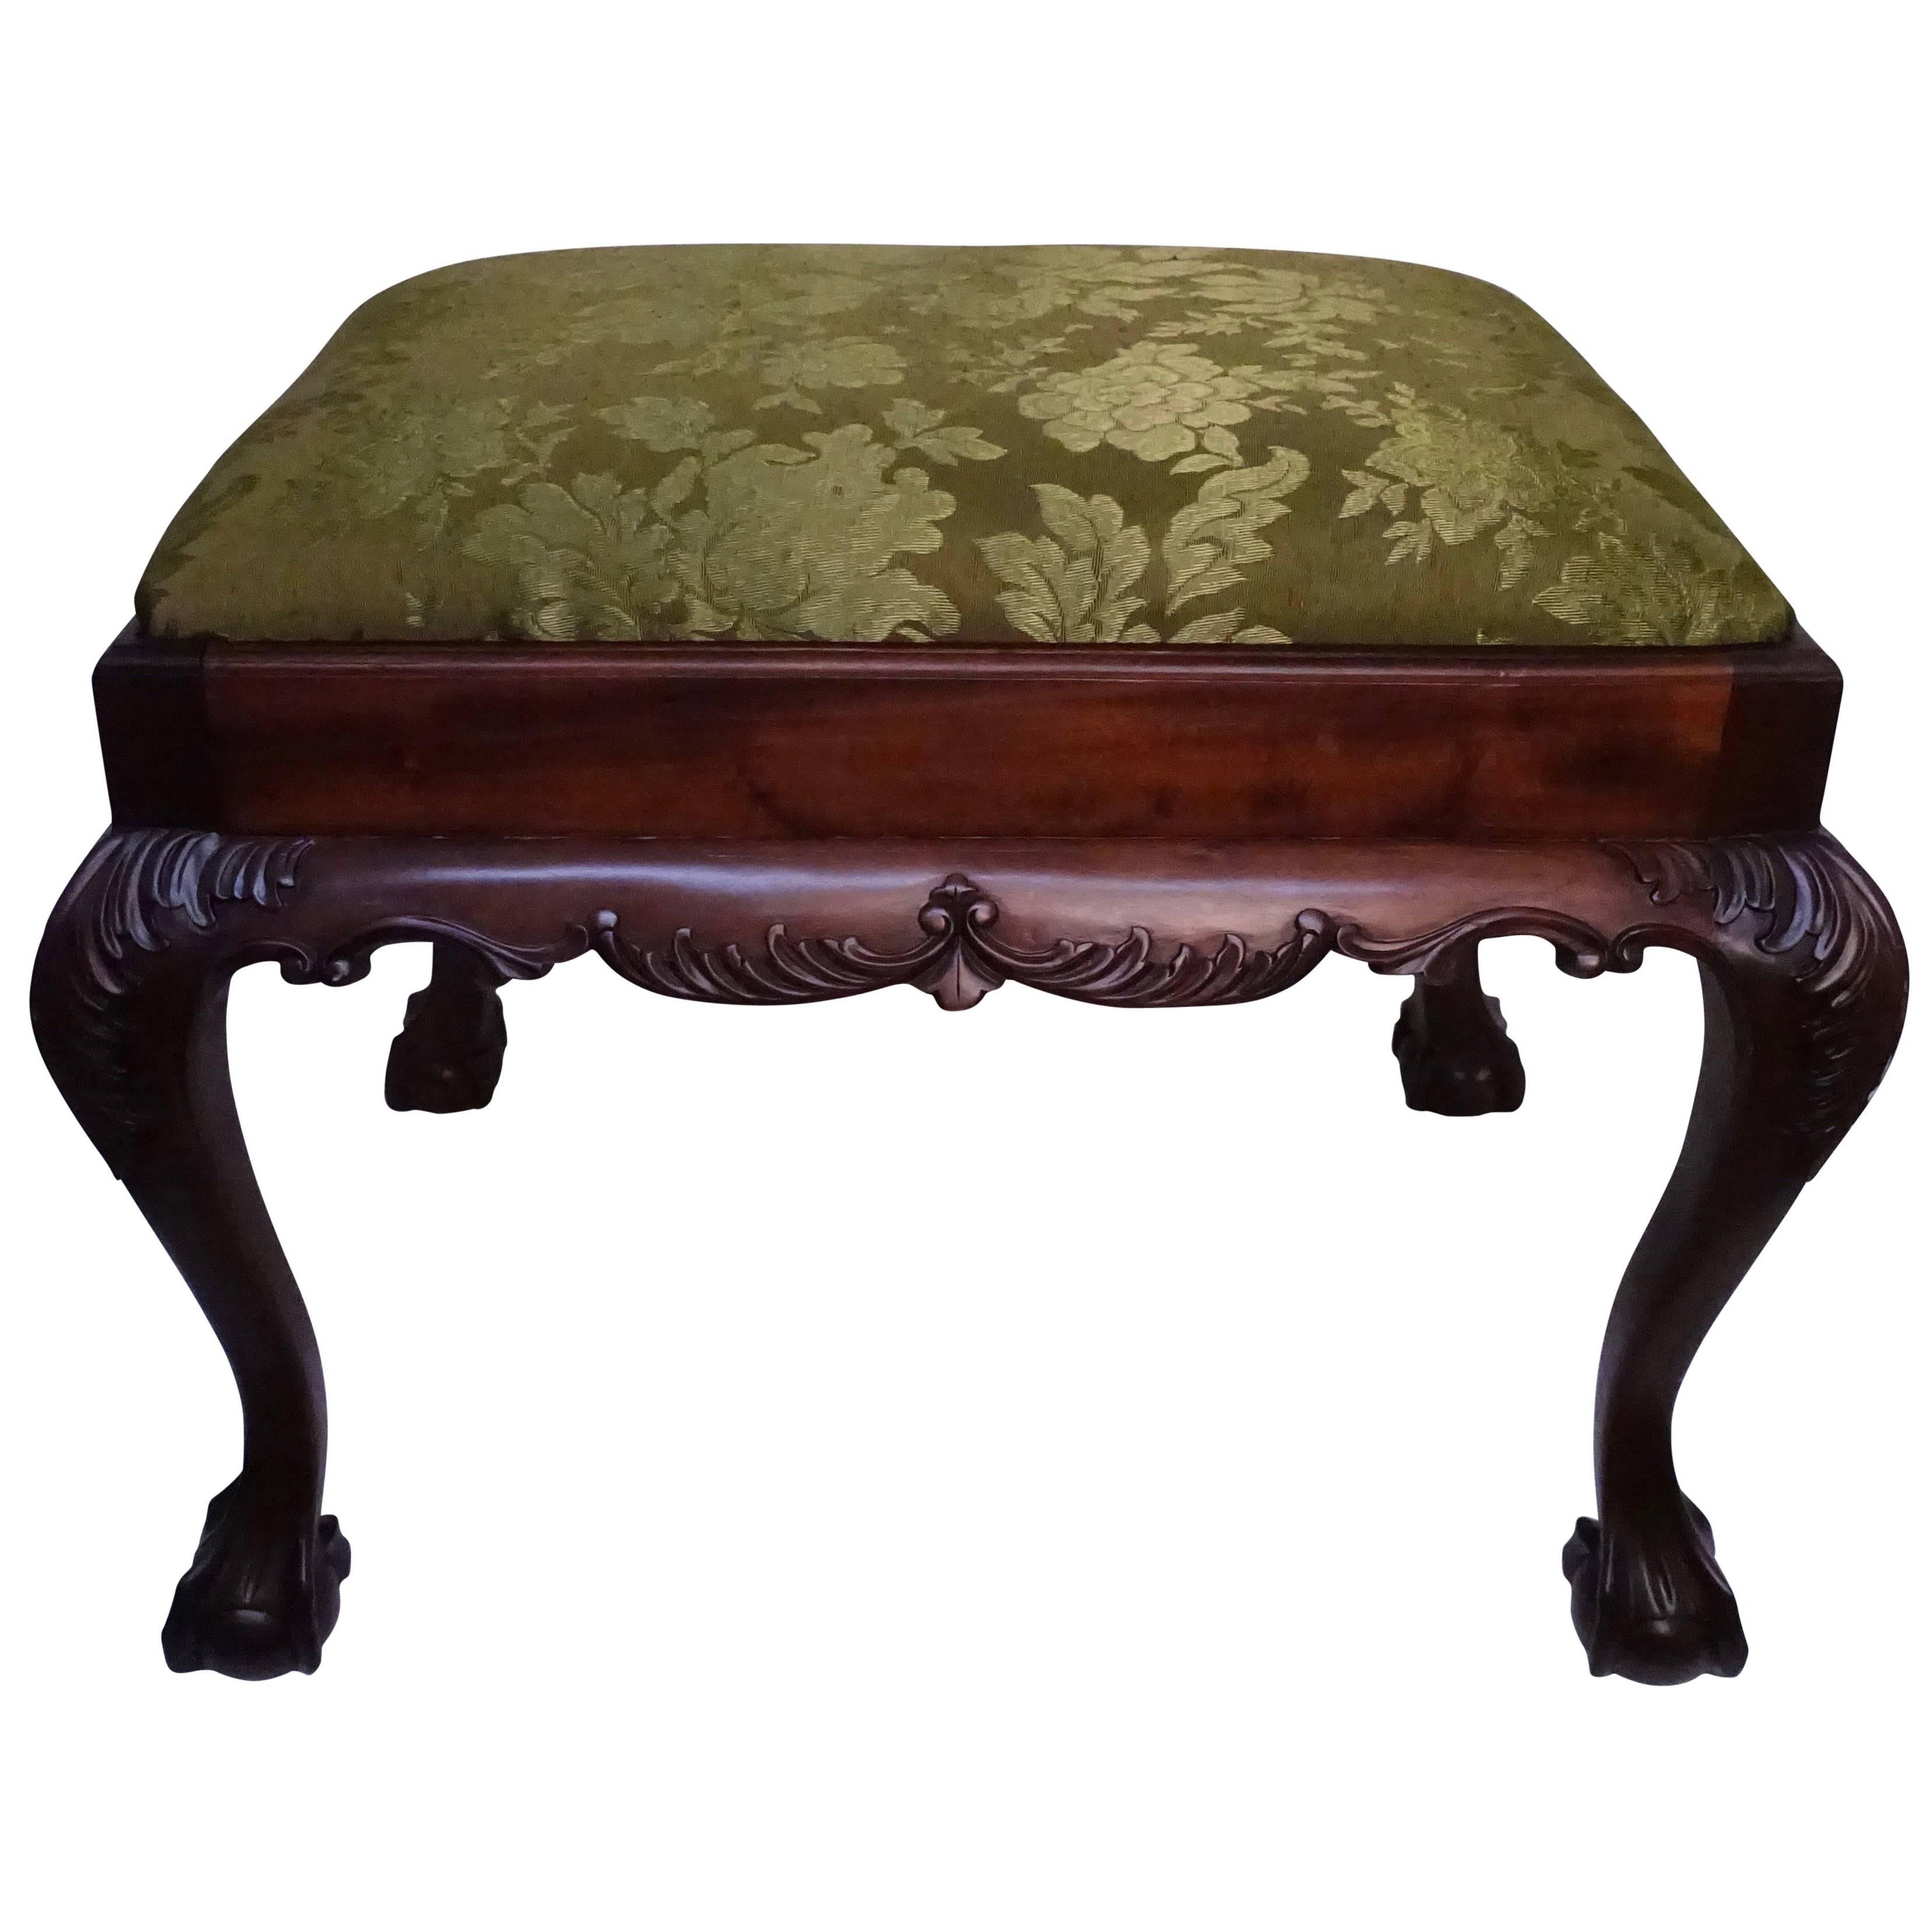 English Mahogany Bench or Stool with Claw and Ball Feet